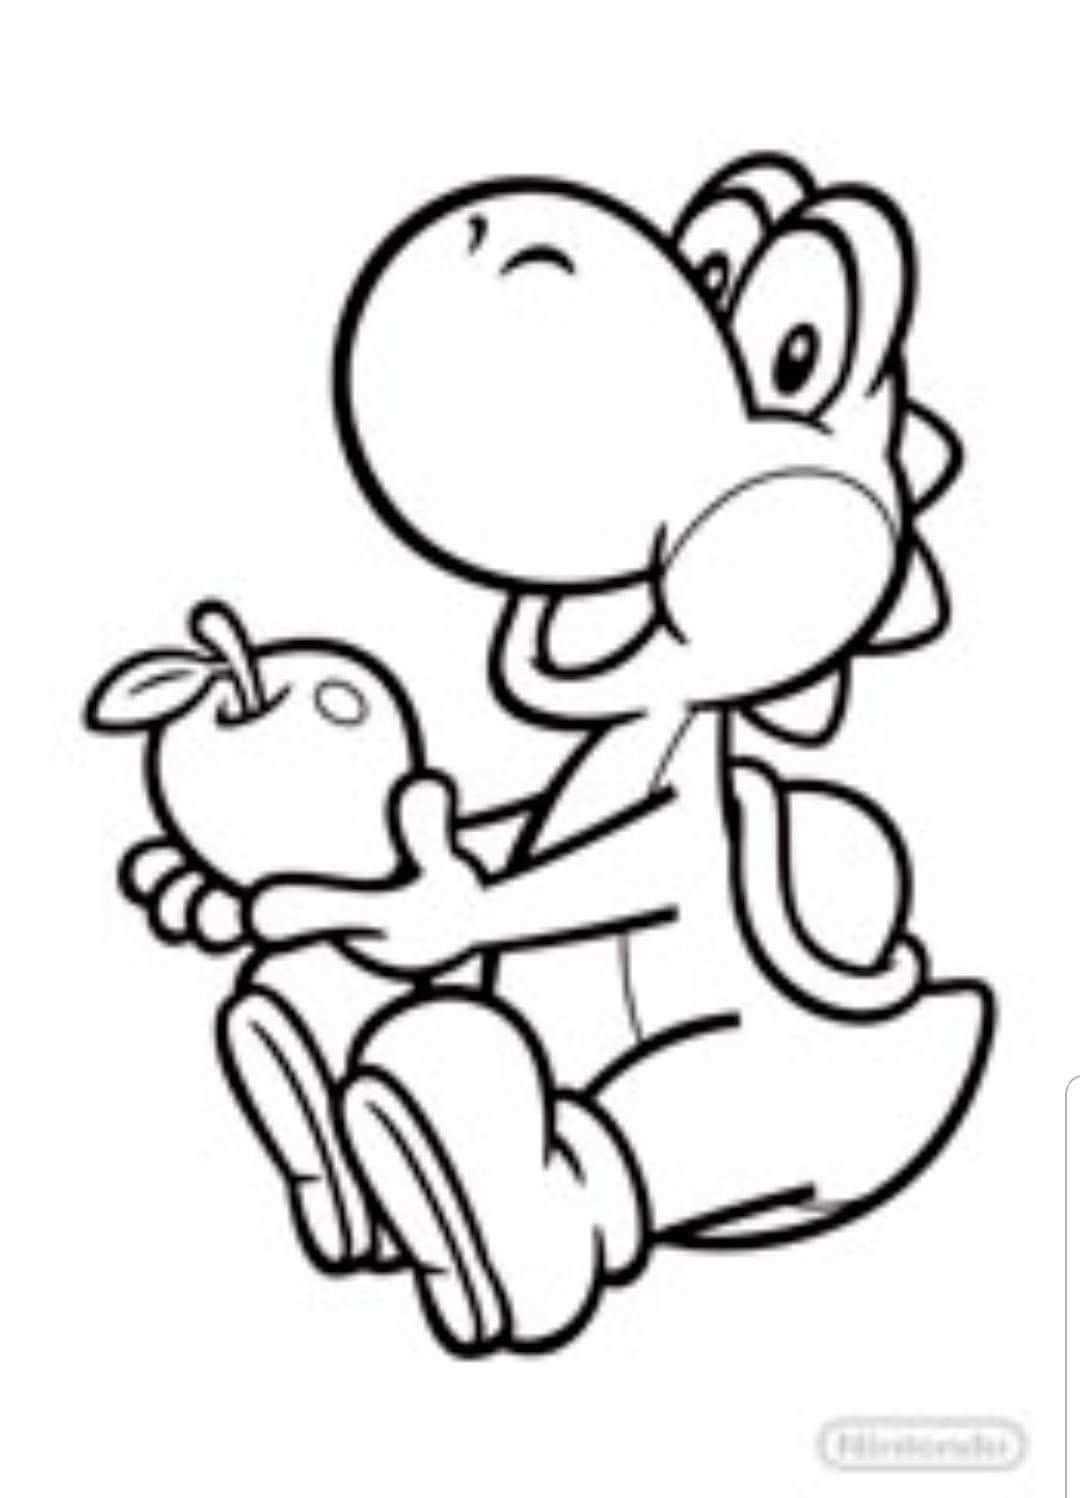 Pin By Mitch Art On Mario Super Mario Coloring Pages Coloring Pages Mario Coloring Pa